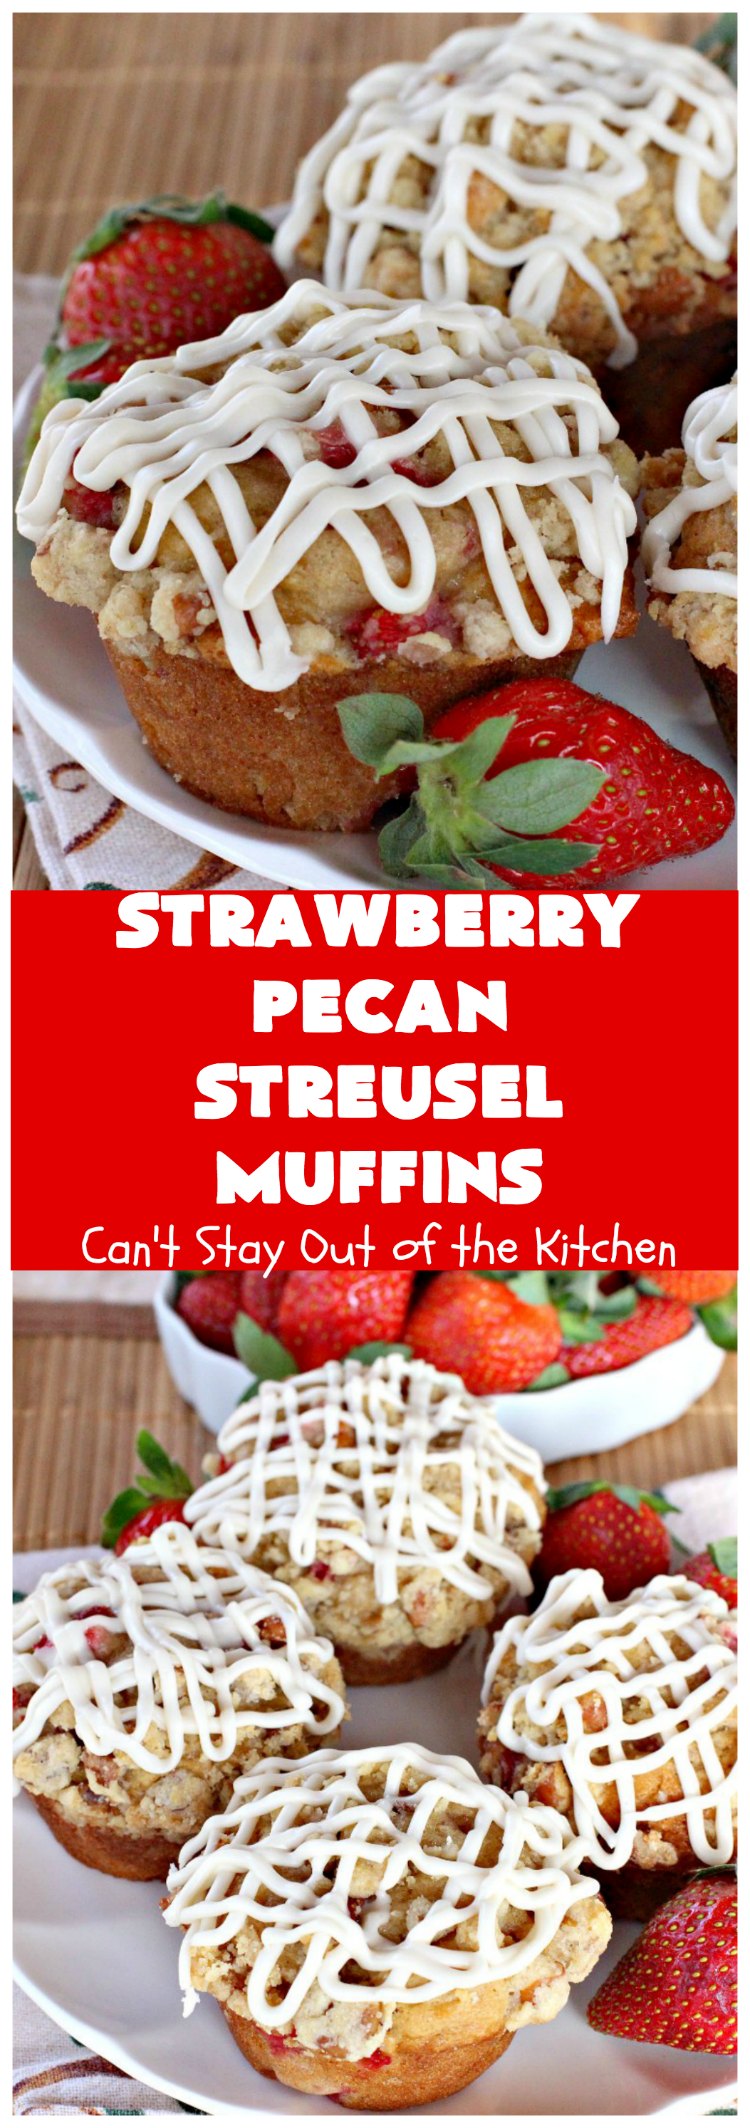 Strawberry Pecan Streusel Muffins | Can't Stay Out of the Kitchen